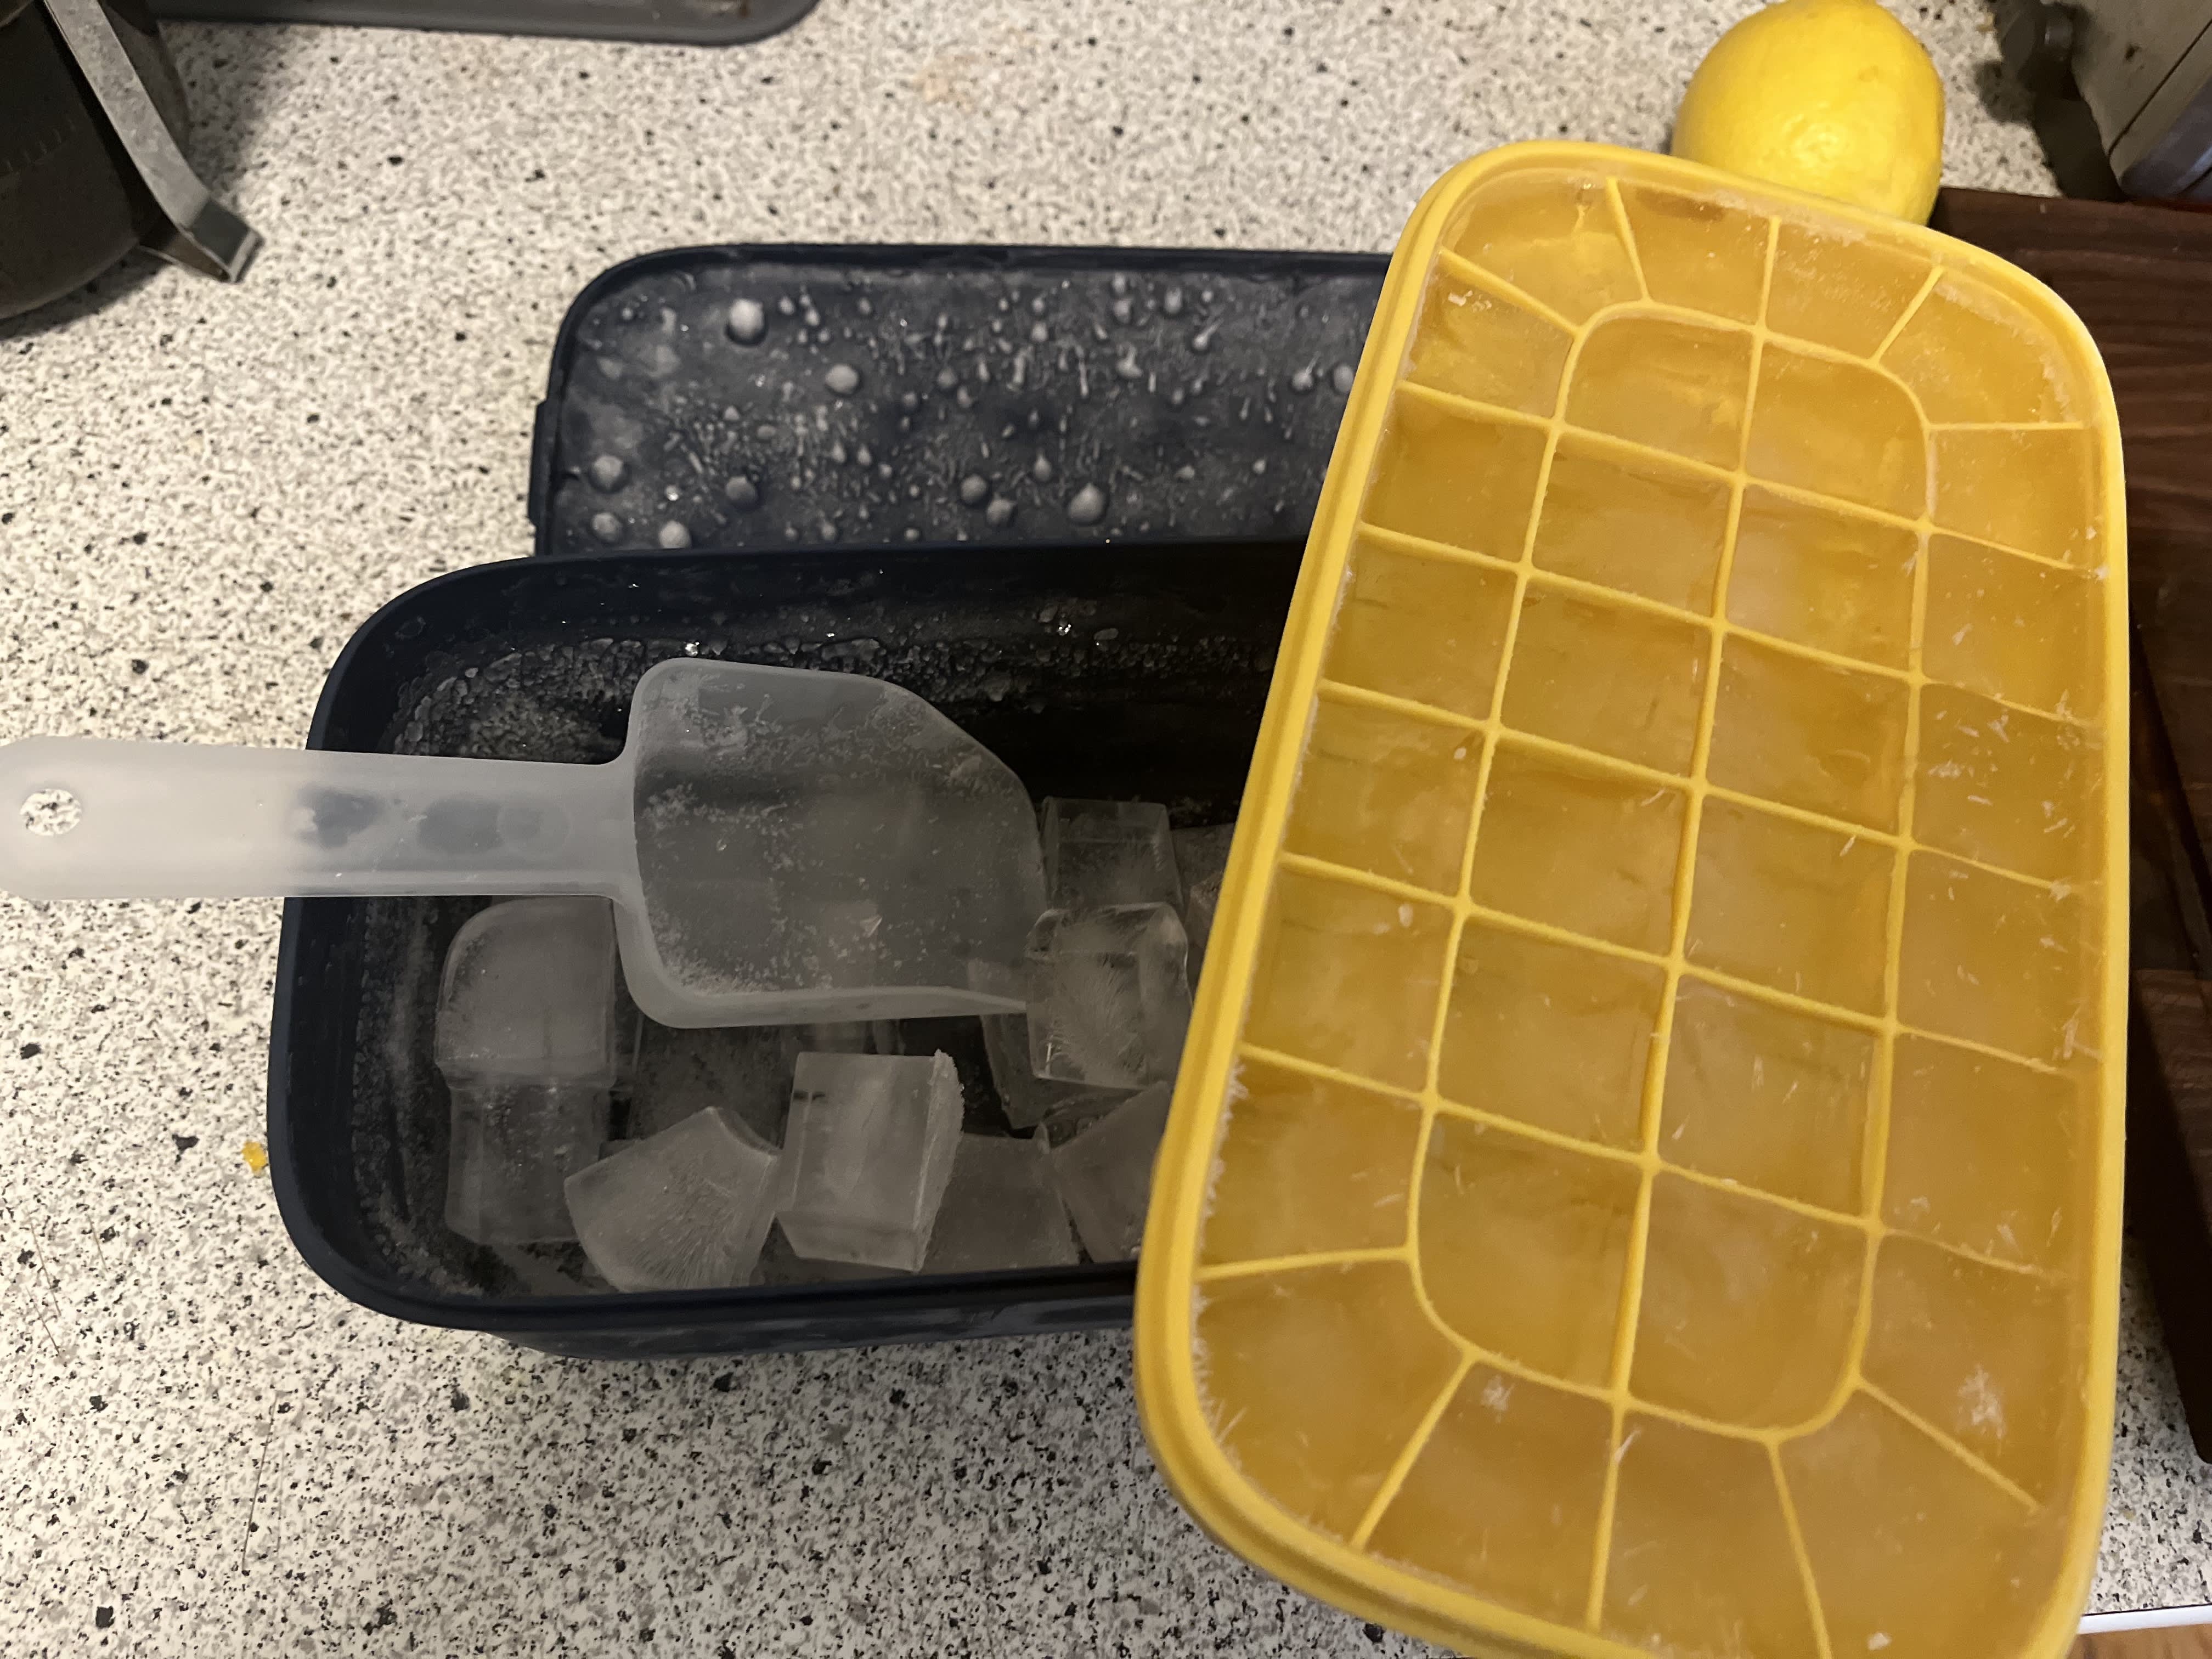 Ice Cube Bin Scoop Trays - Use It as a Portable Box in the Freezer,  Shelves, Pantry: Home & Kitchen 